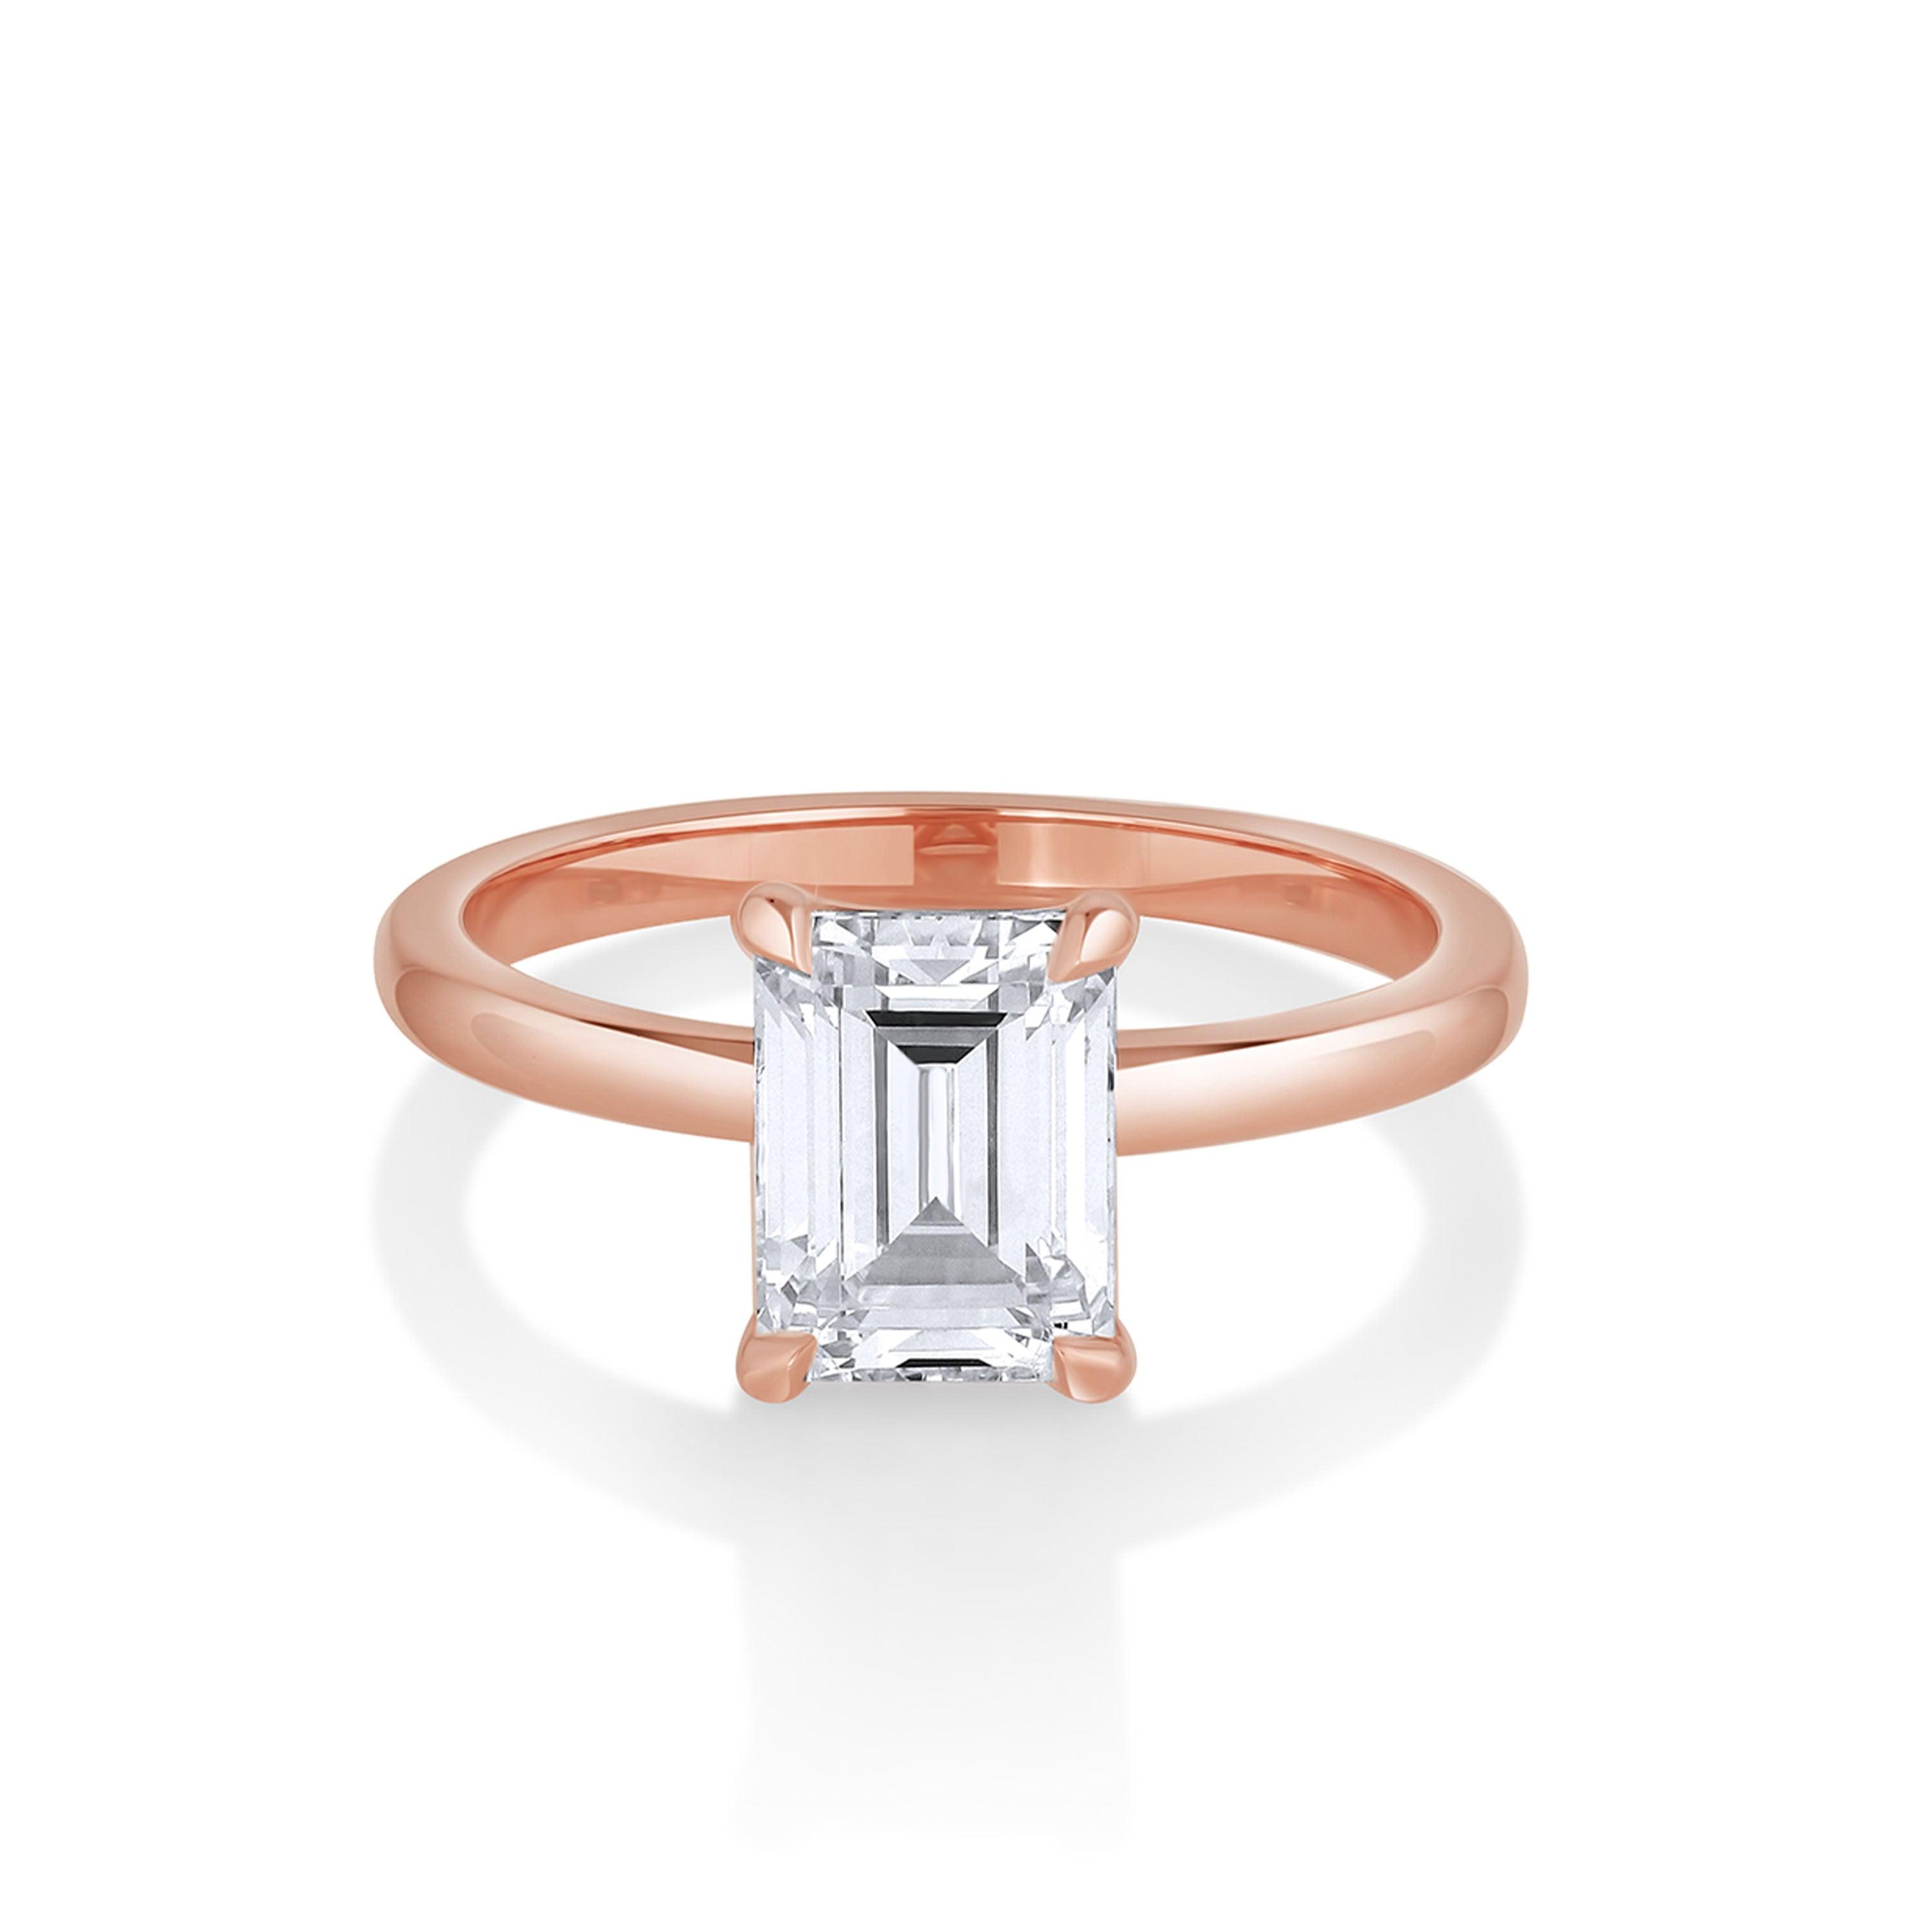 Marrow Fine Jewelry Annette Solitaire Emerald Cut White Diamond Engagement Ring